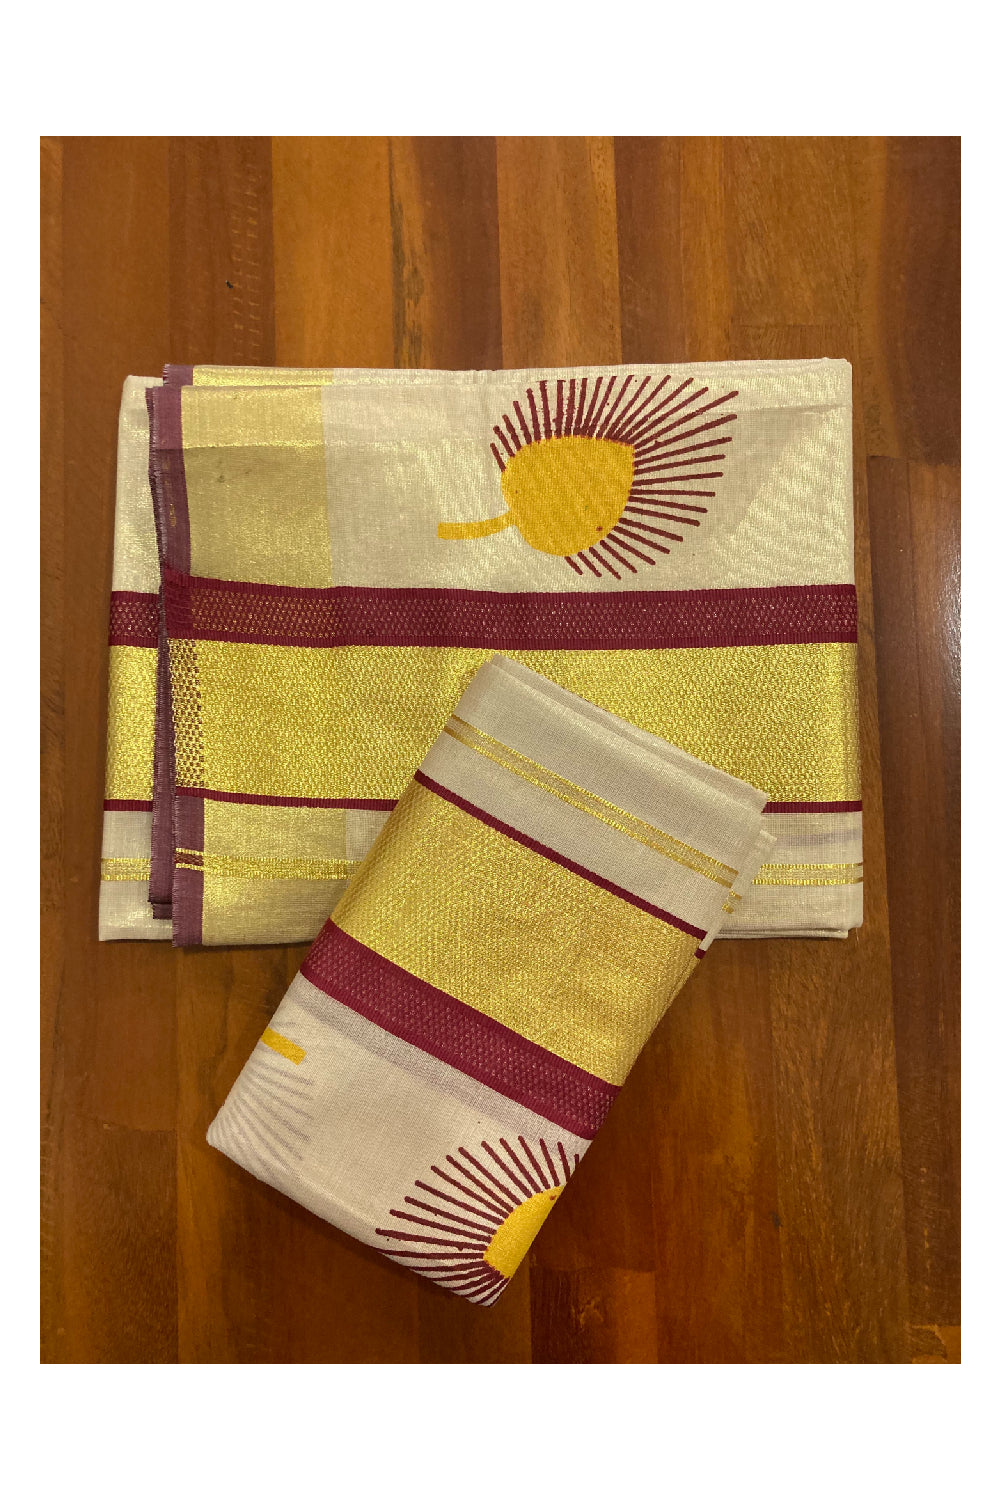 Tissue Set Mundu with Hand Block Printed Red and Yellow Design